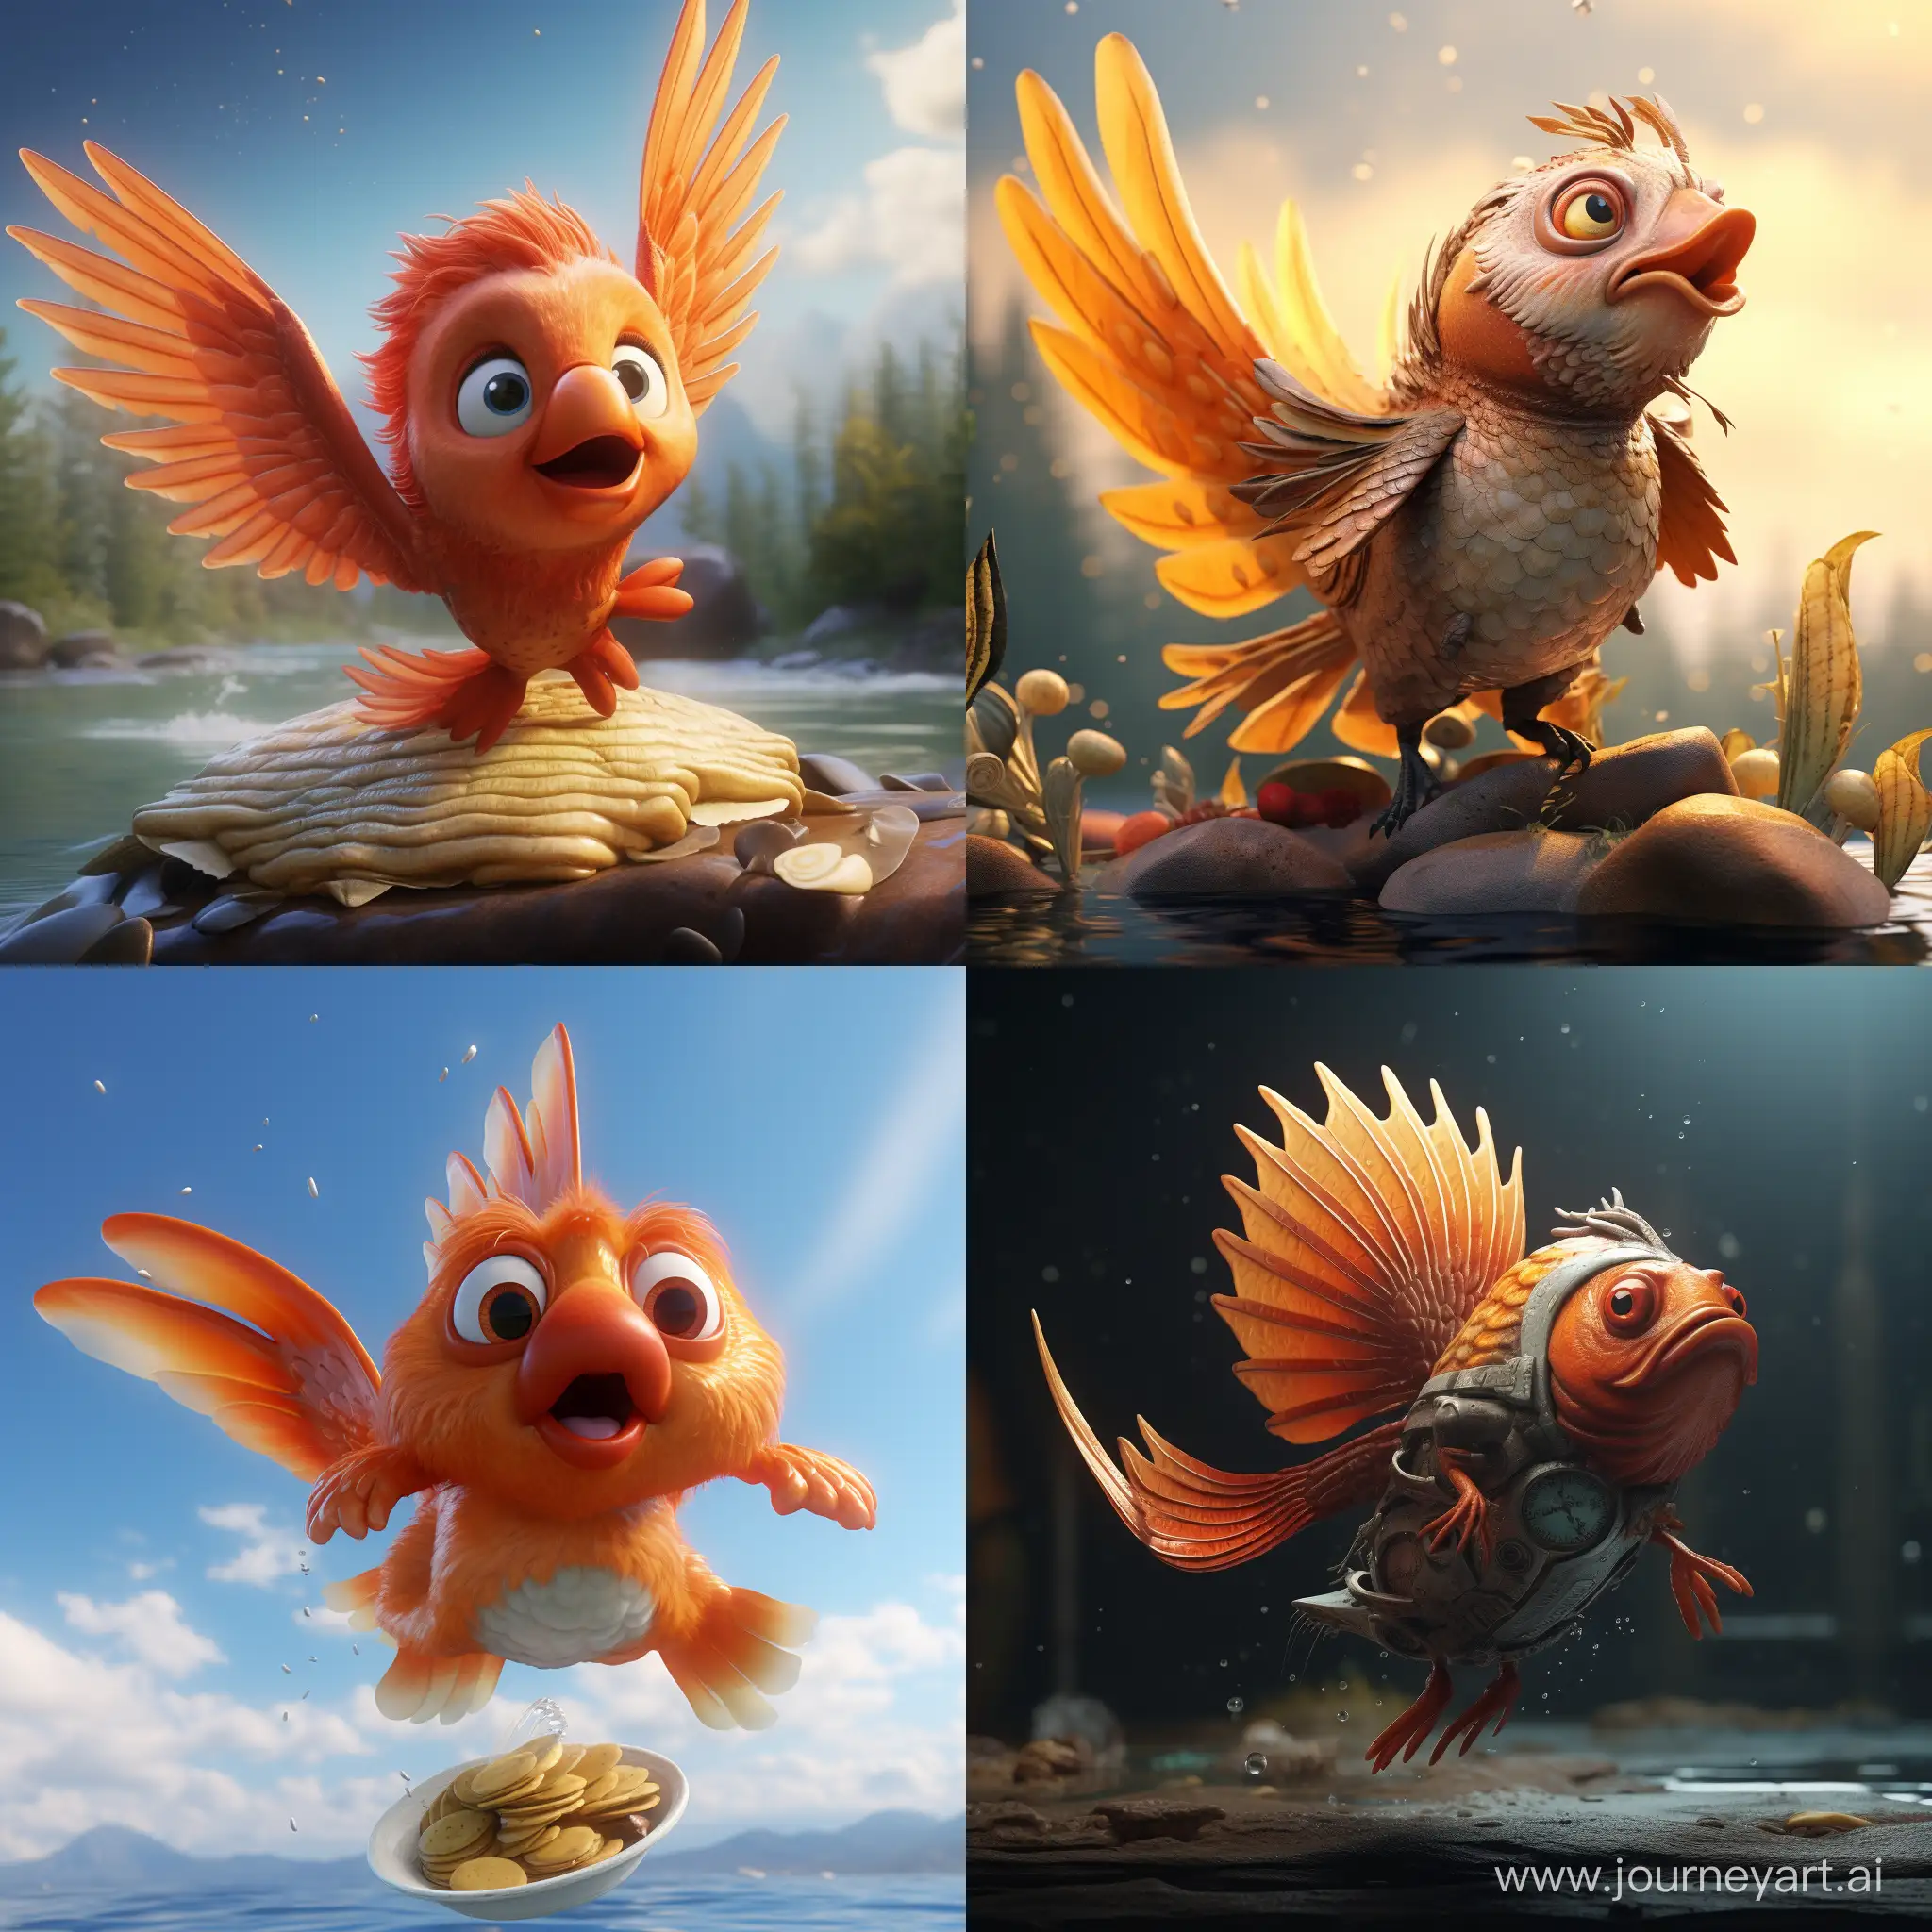 Aquatic-Delight-3D-Animated-Fusion-of-Fish-and-Chicken-Wings